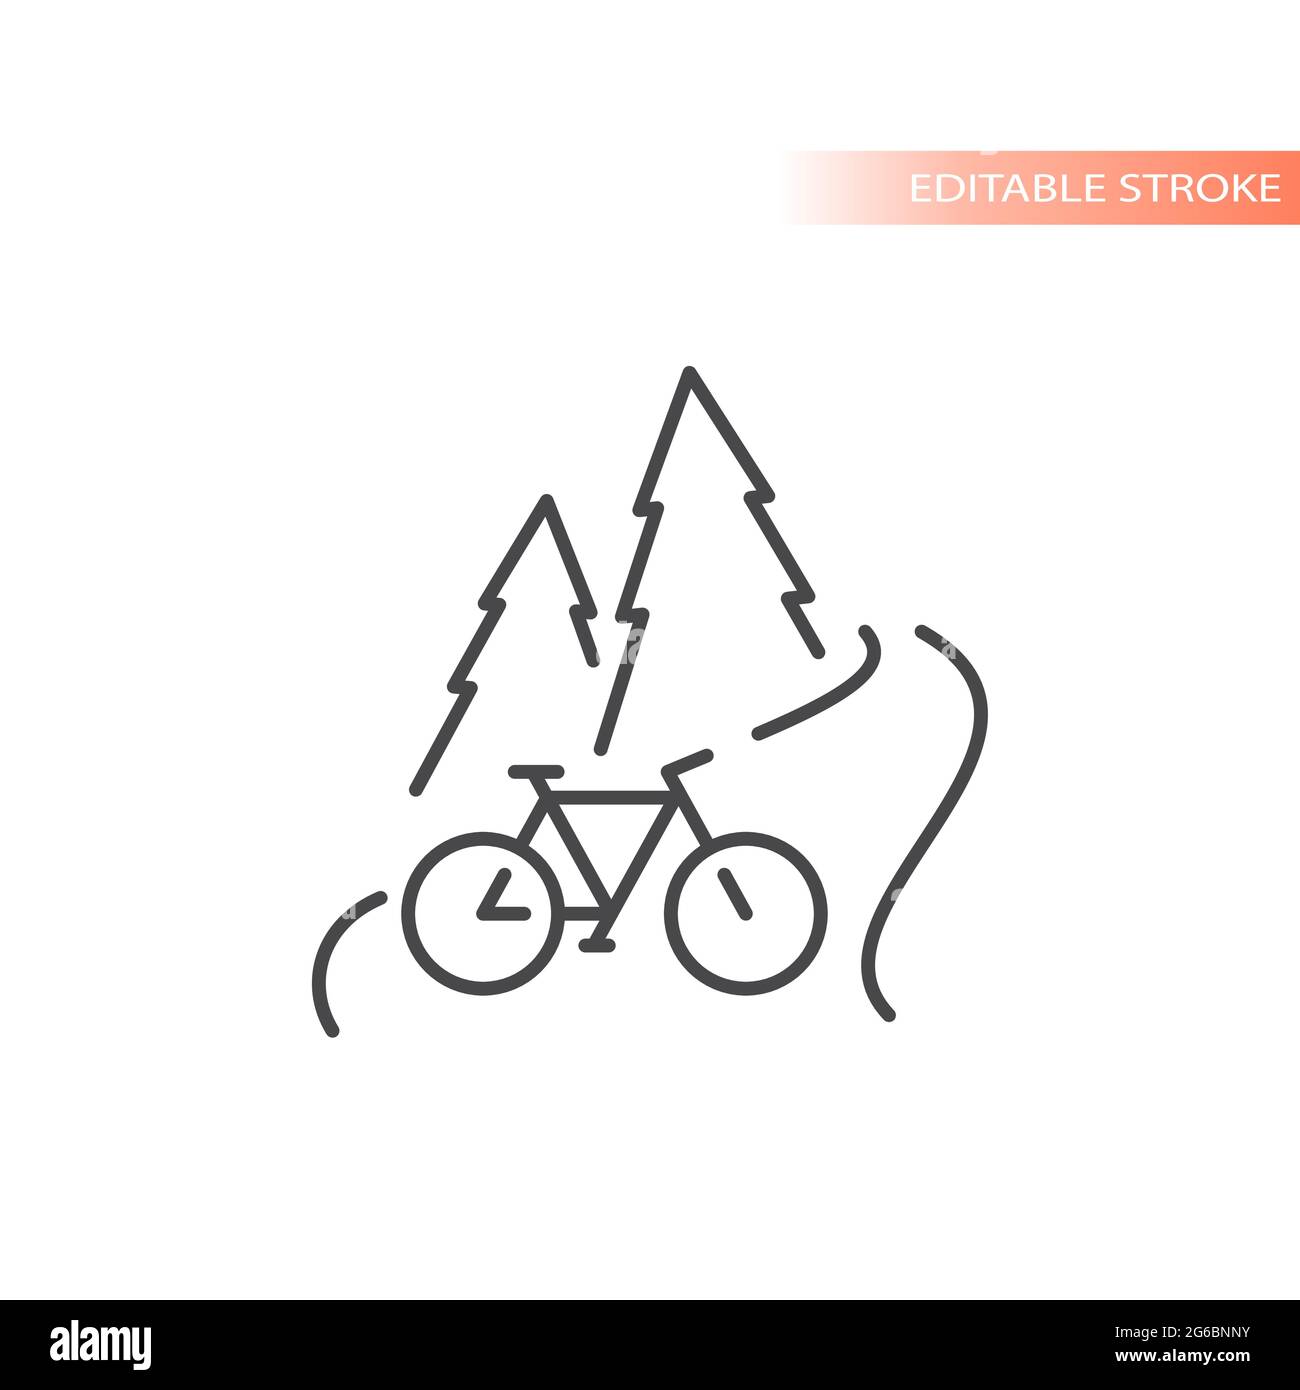 Outdoors biking line vector icon. Nature scape with road, pines and bicycle, editable stroke. Stock Vector